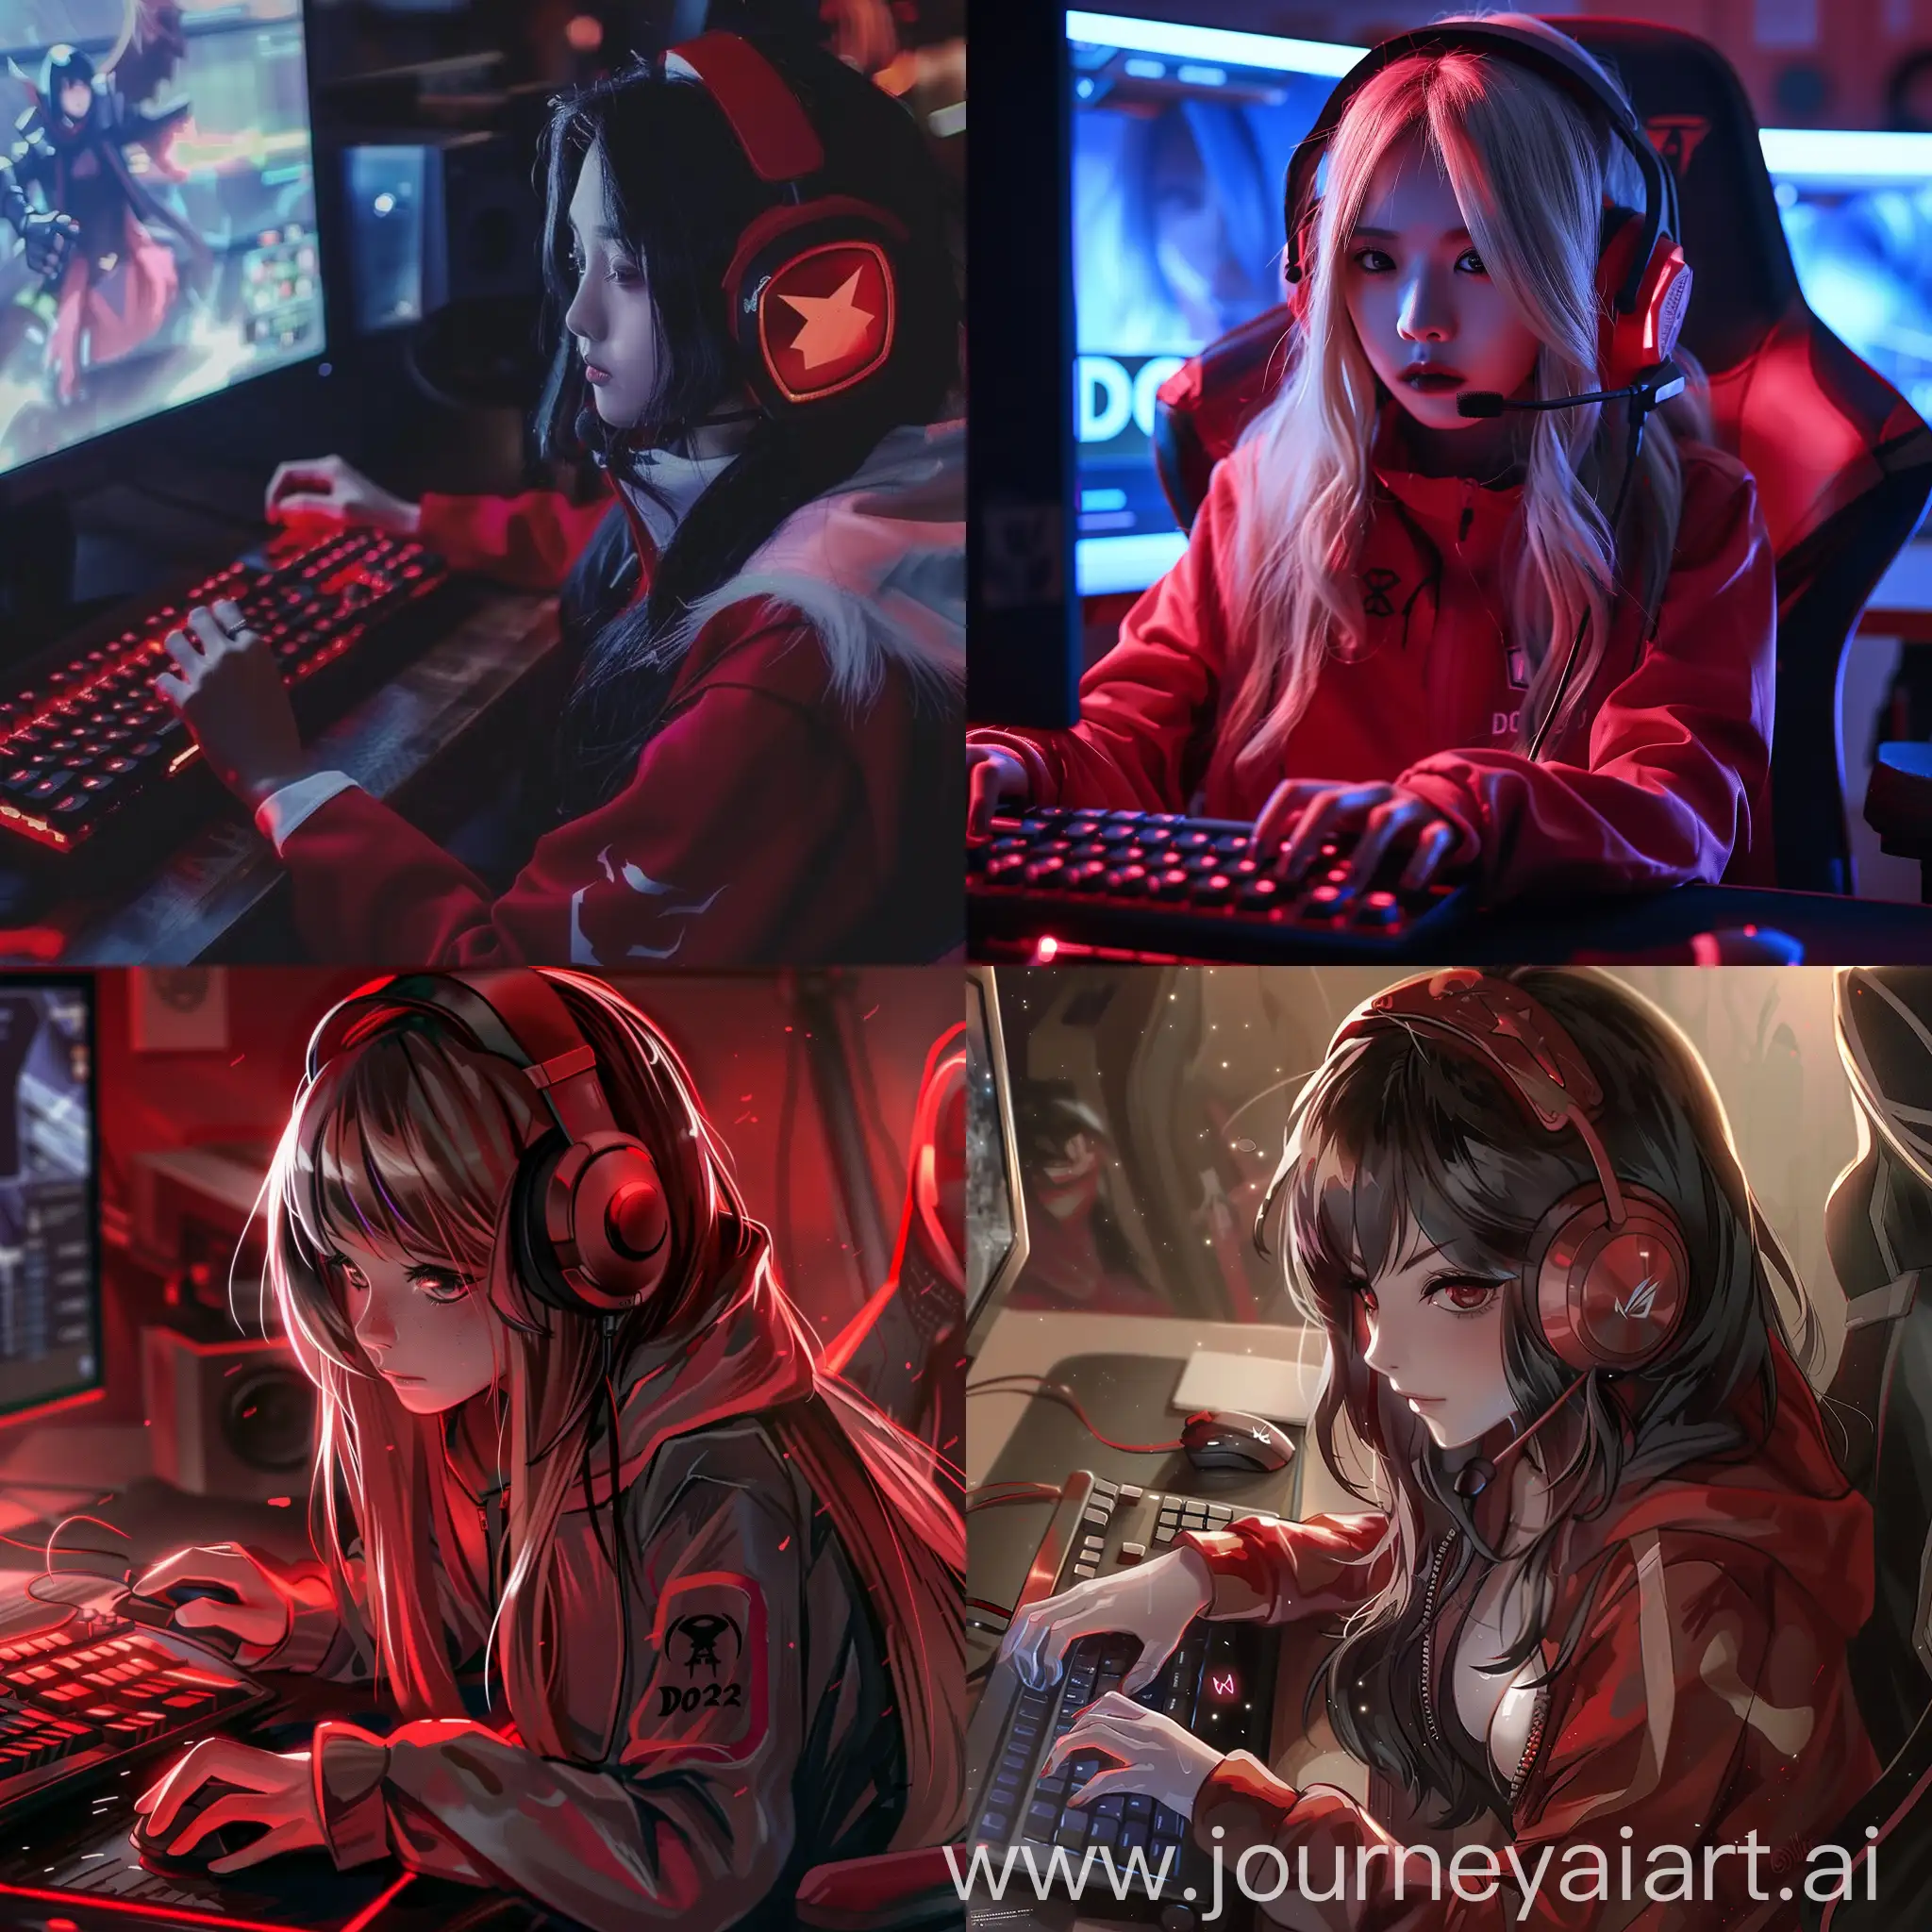 Anime-Girl-Playing-Dota-2-in-Vibrant-Red-Theme